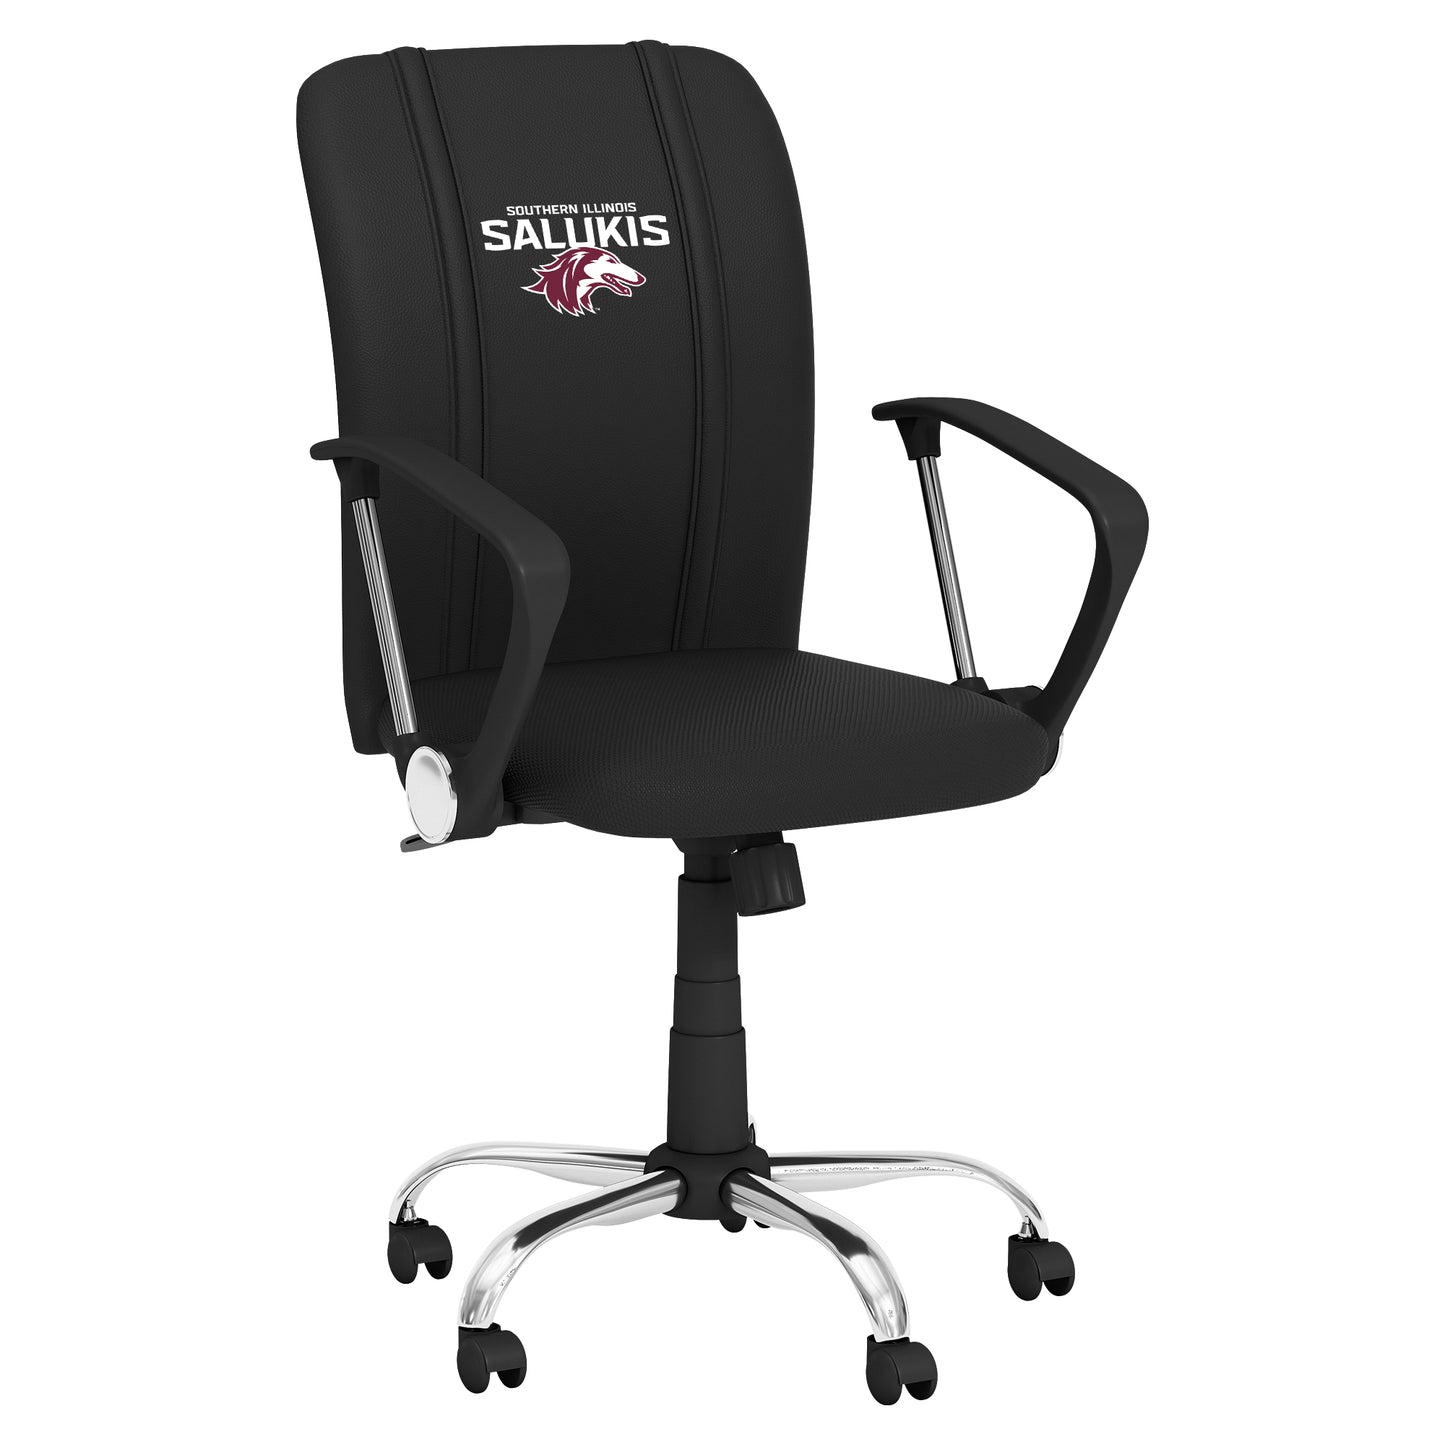 Curve Task Chair with Southern Illinois Salukis Logo